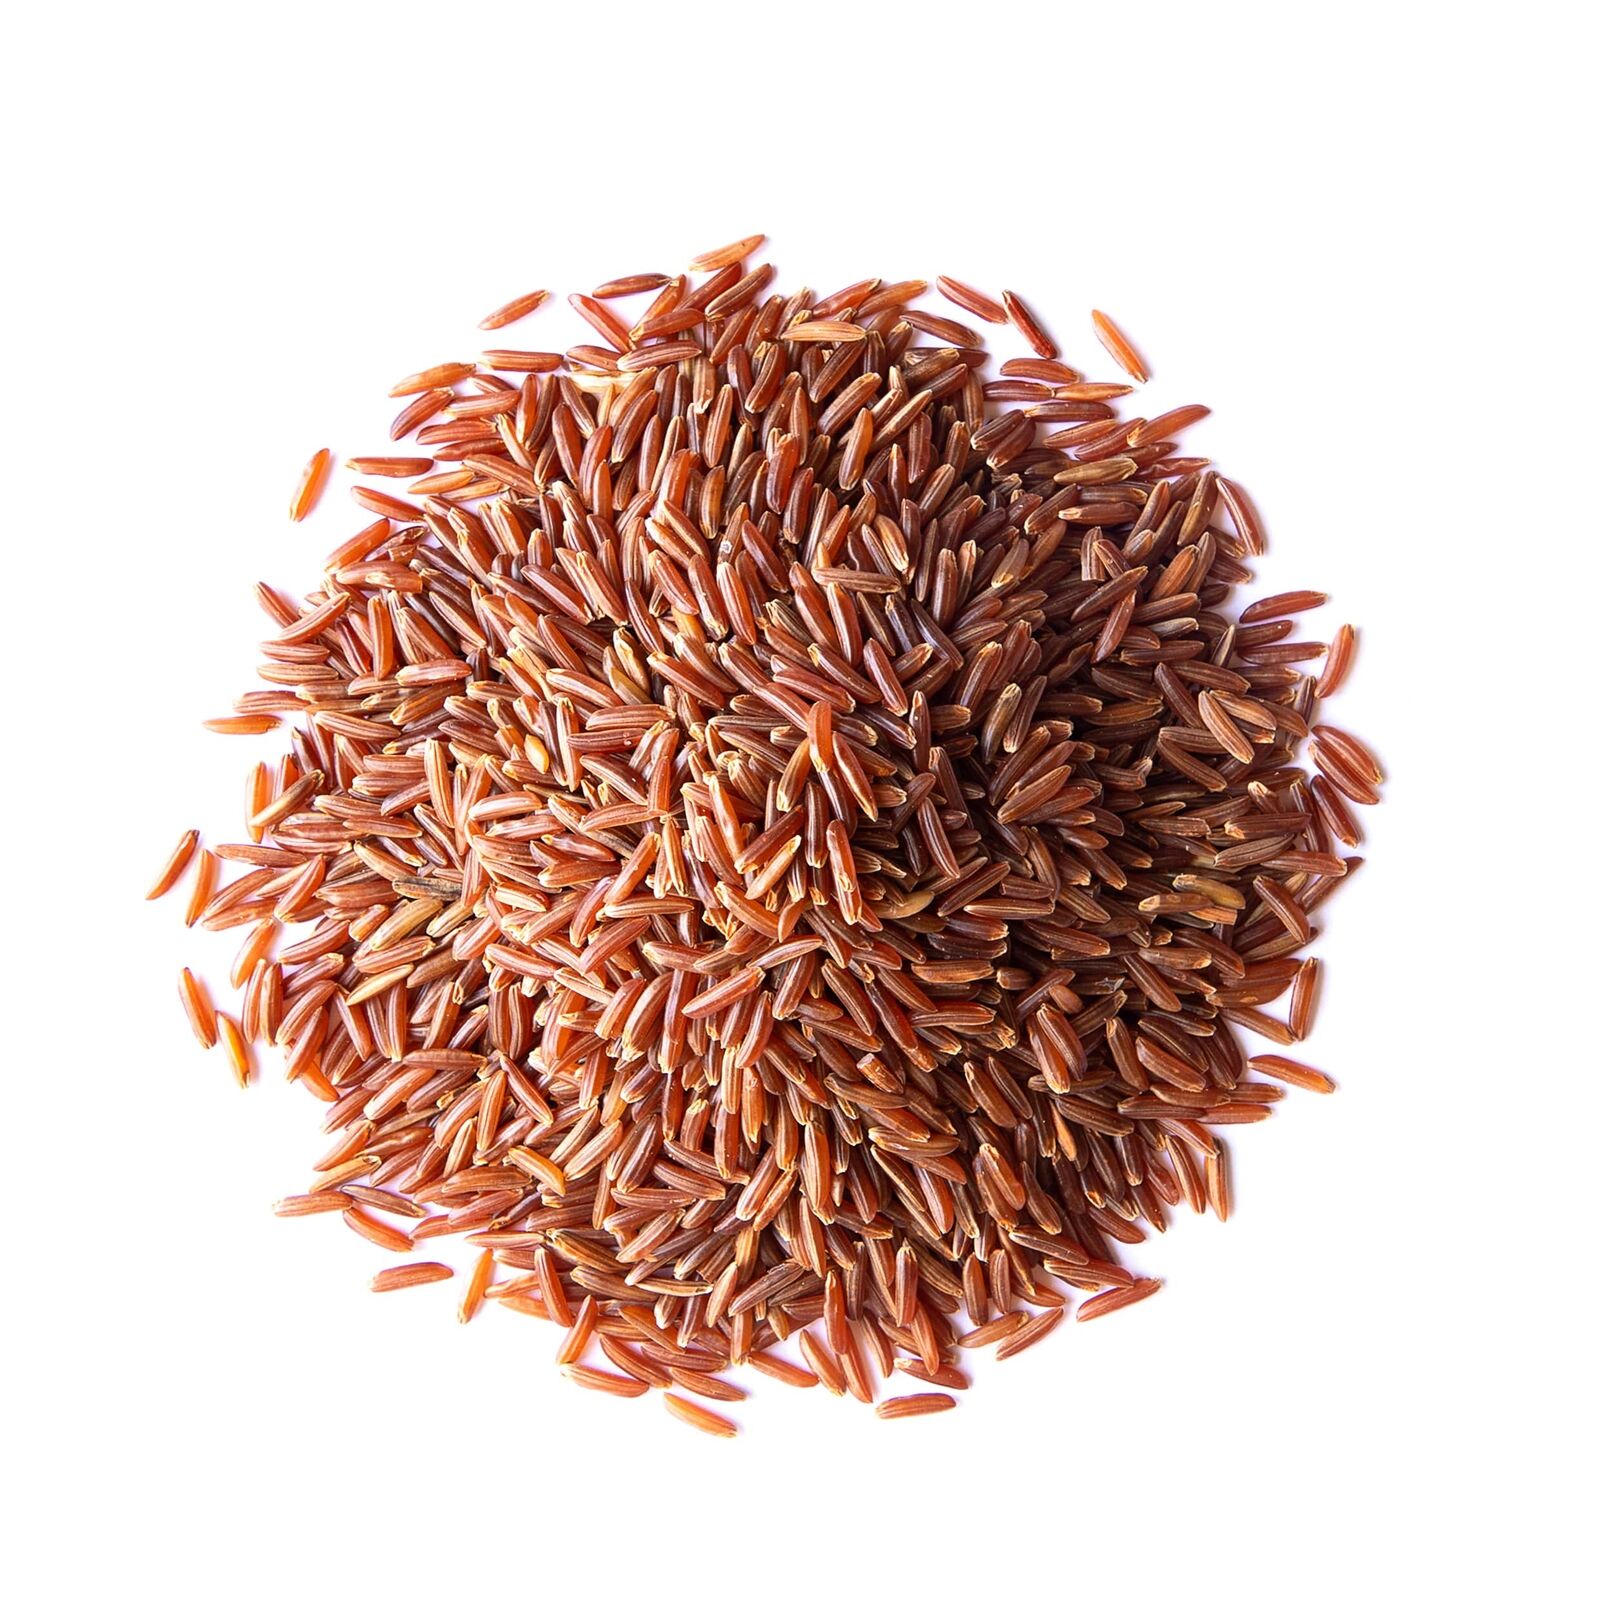 Red Rice - Whole Long-Grain Rice, Nutty Flavor, Soft Texture, Non-Sticky, Bulk